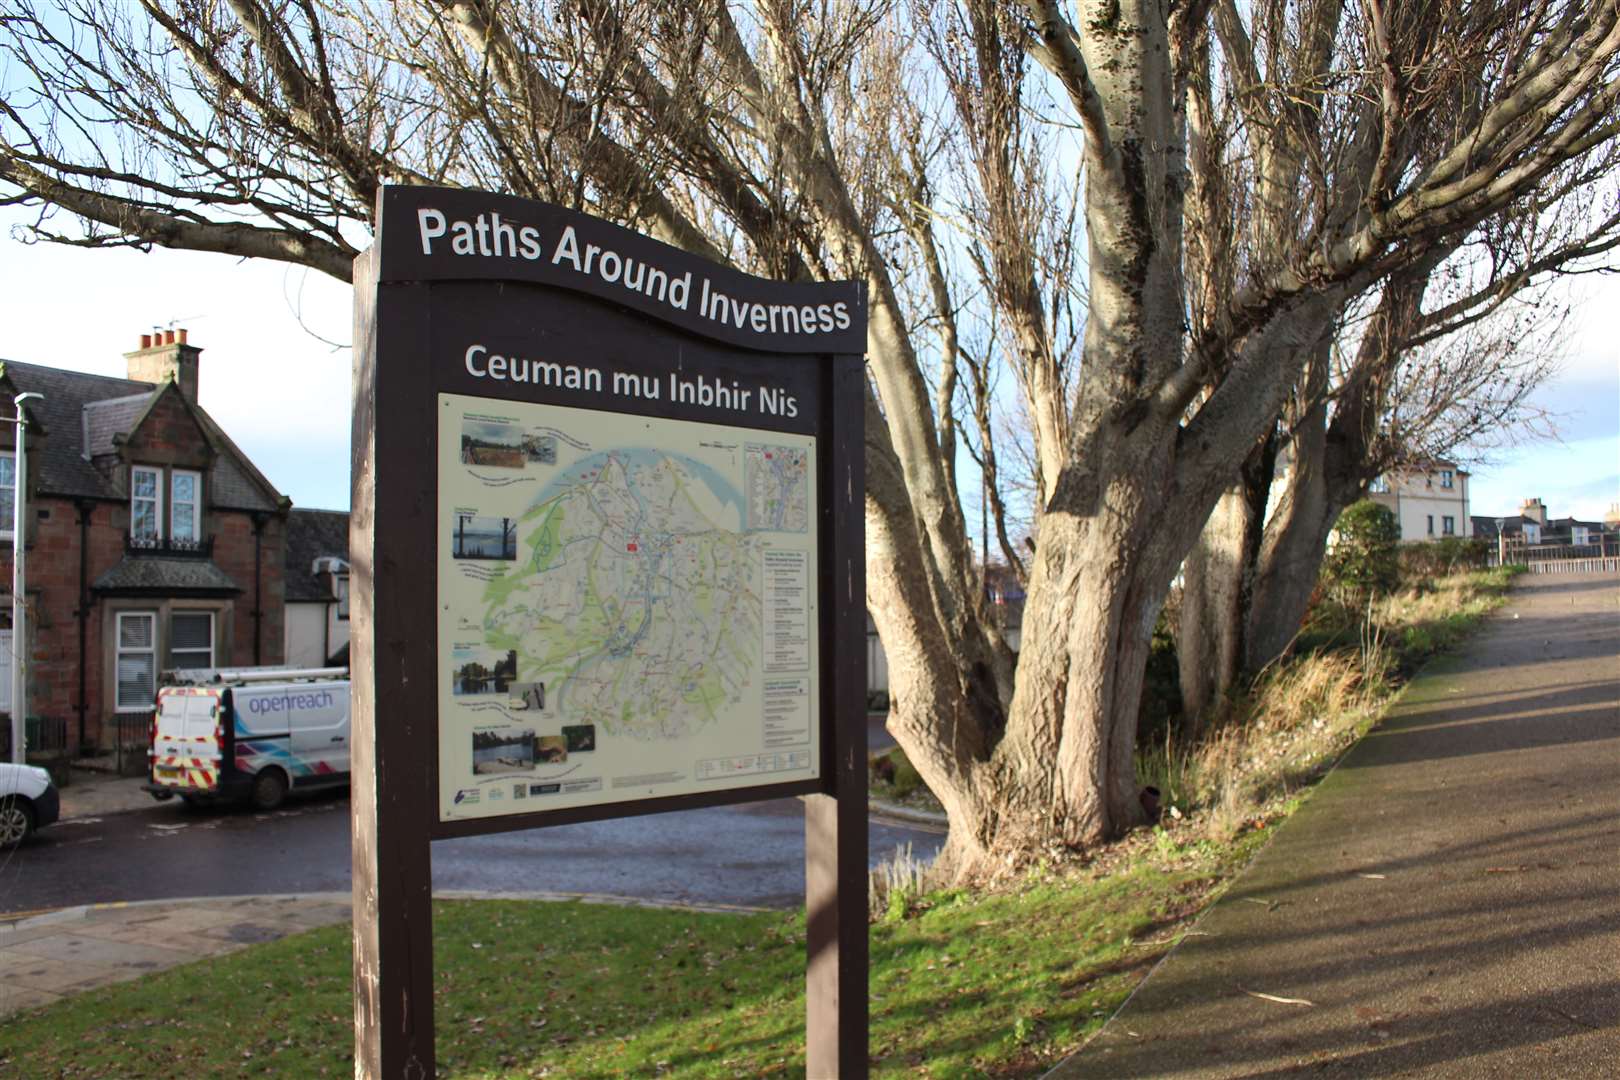 Paths Around Inverness board at the end of Huntly Street.